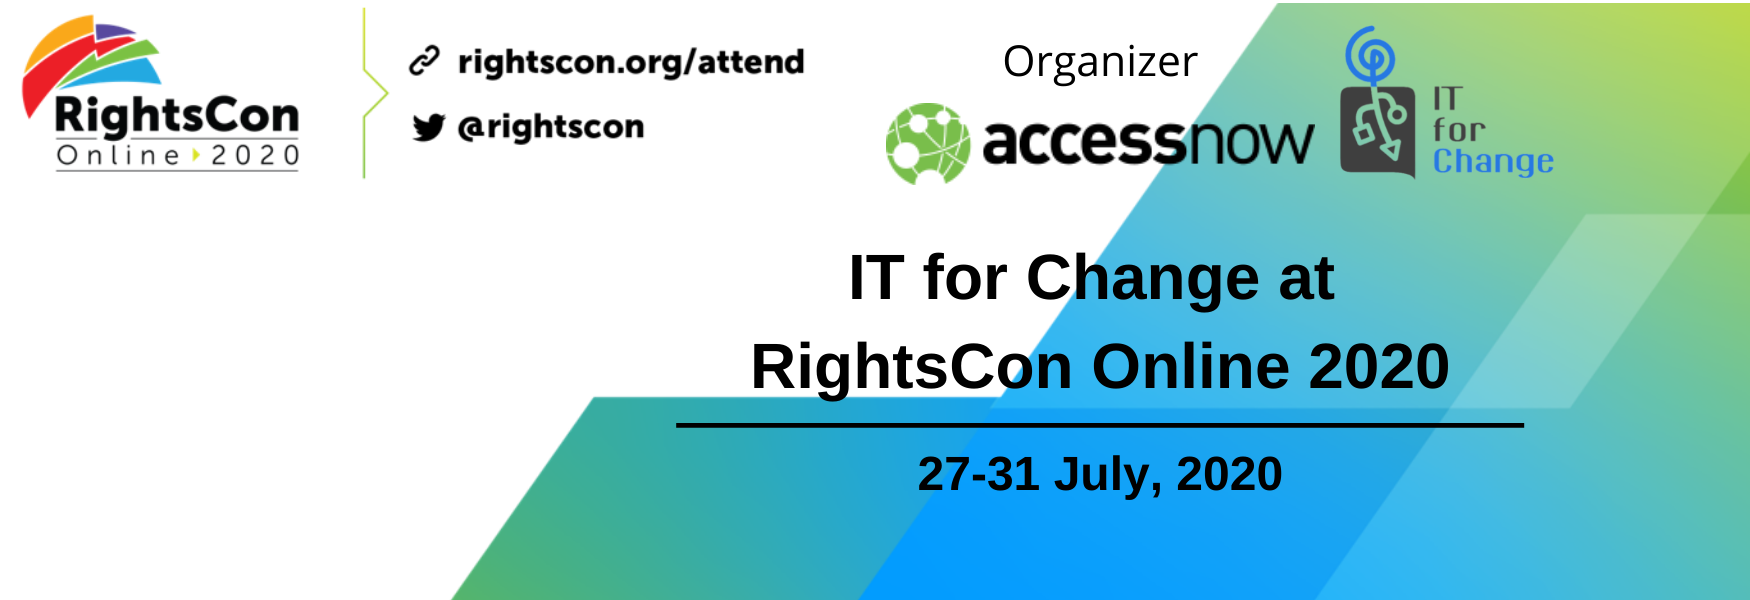 IT for Change at RightsCon Online 2020